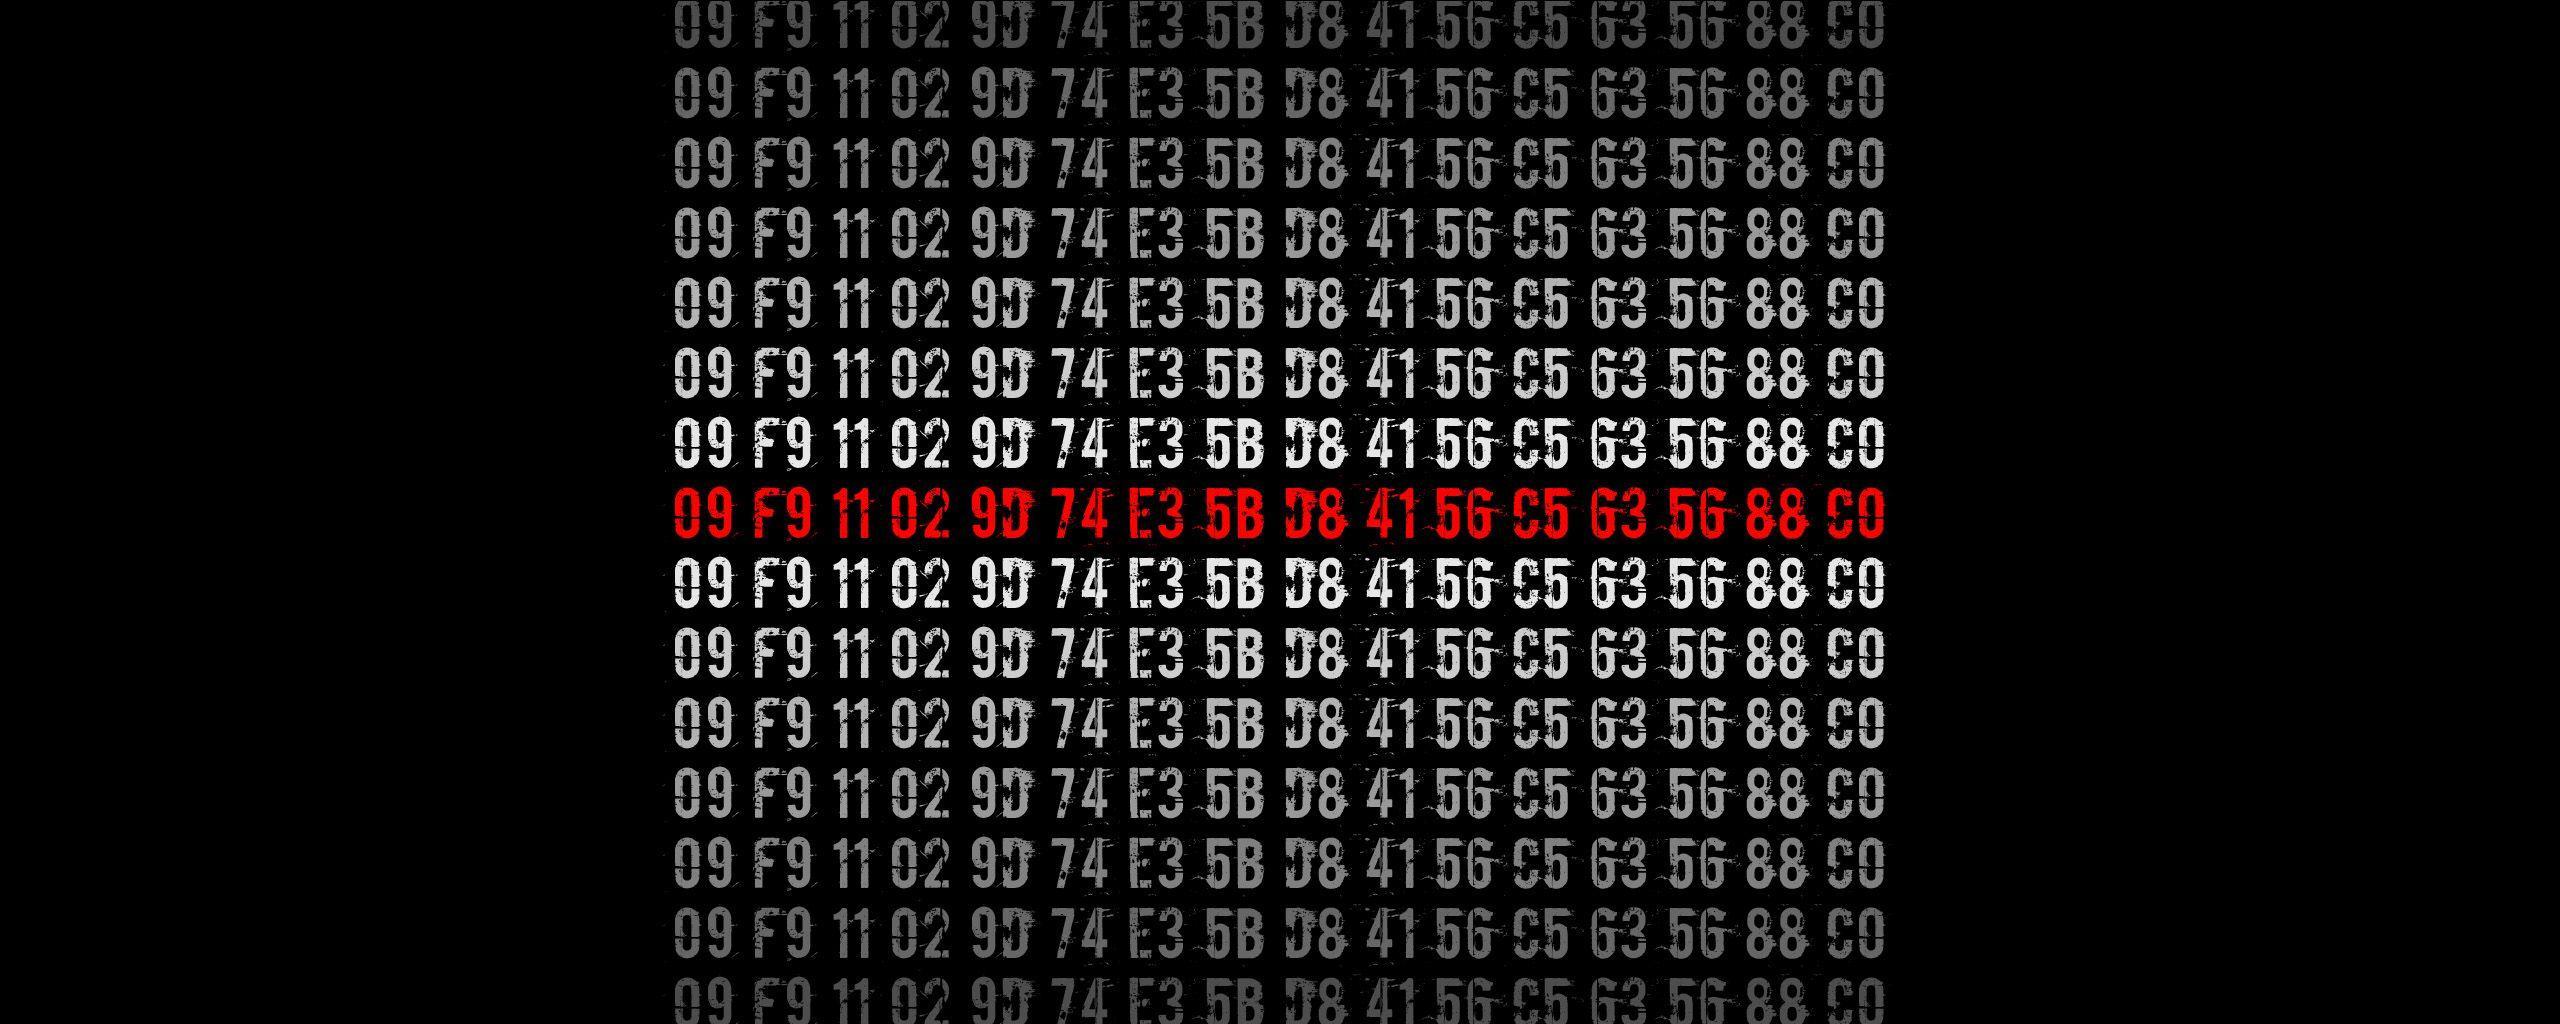 2560 x 1024 · jpeg - Encryption Wallpapers - Wallpaper Cave